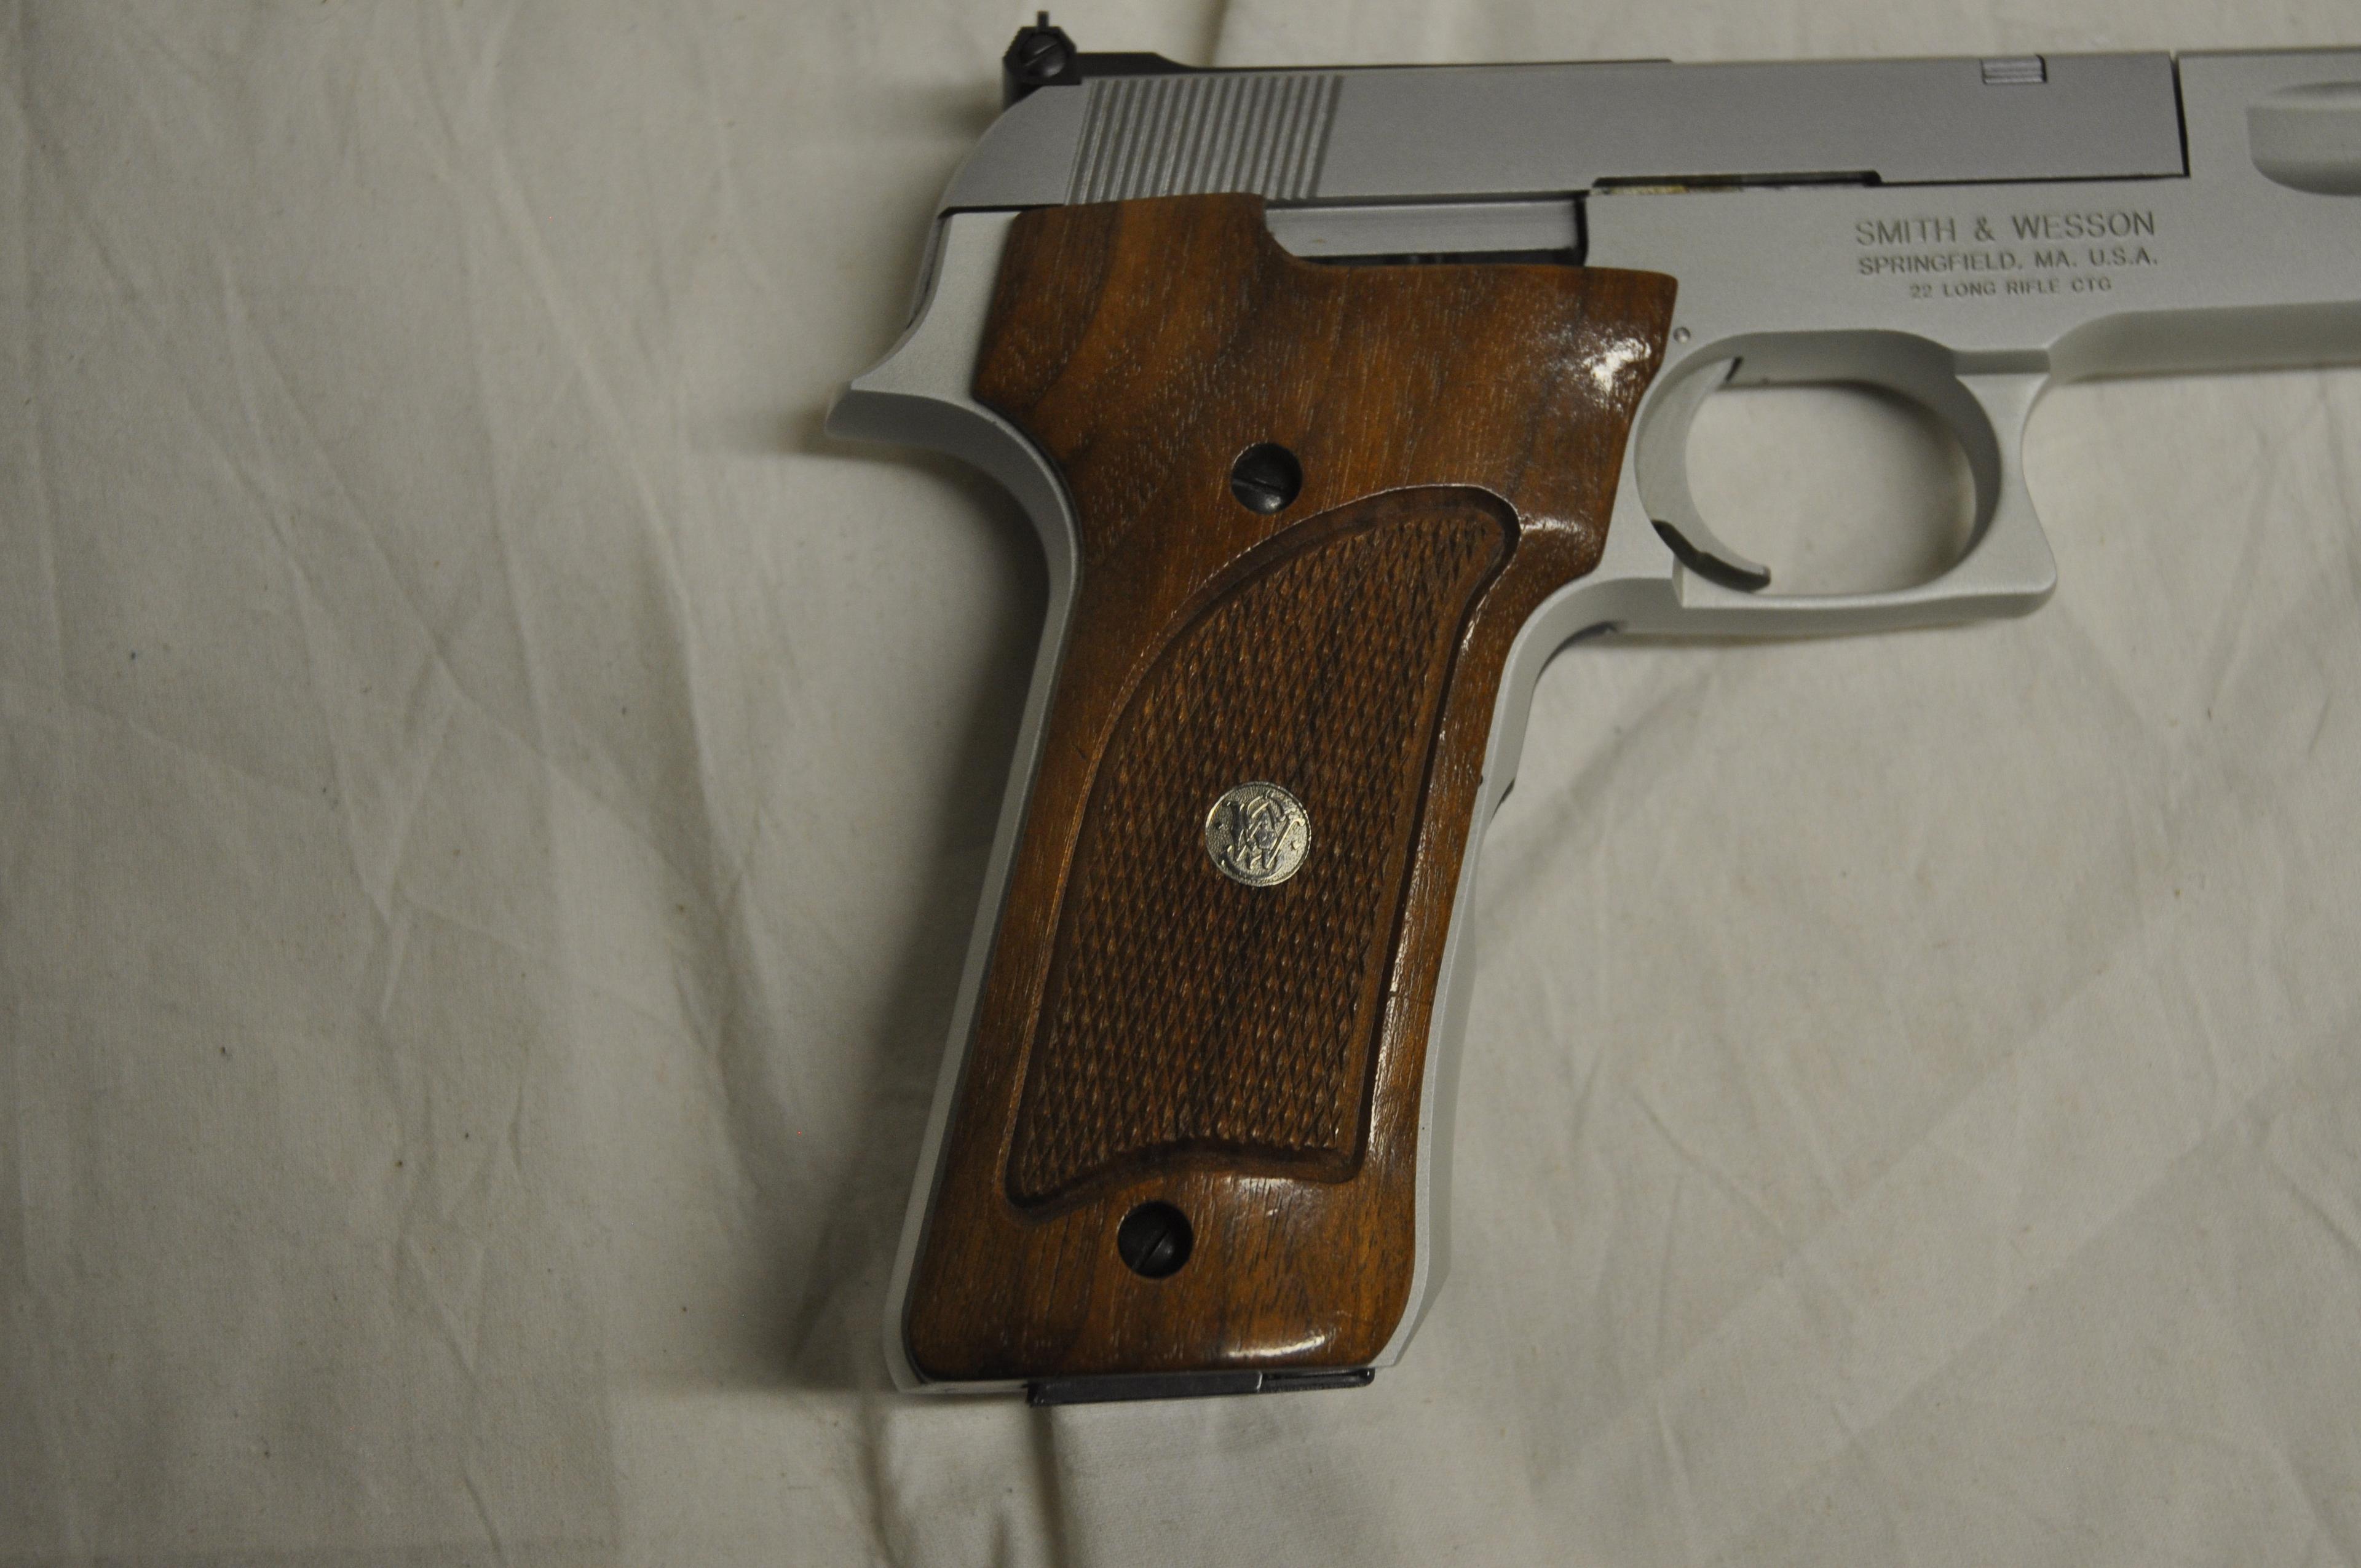 Smith & Wesson Model 622 Target Pistol